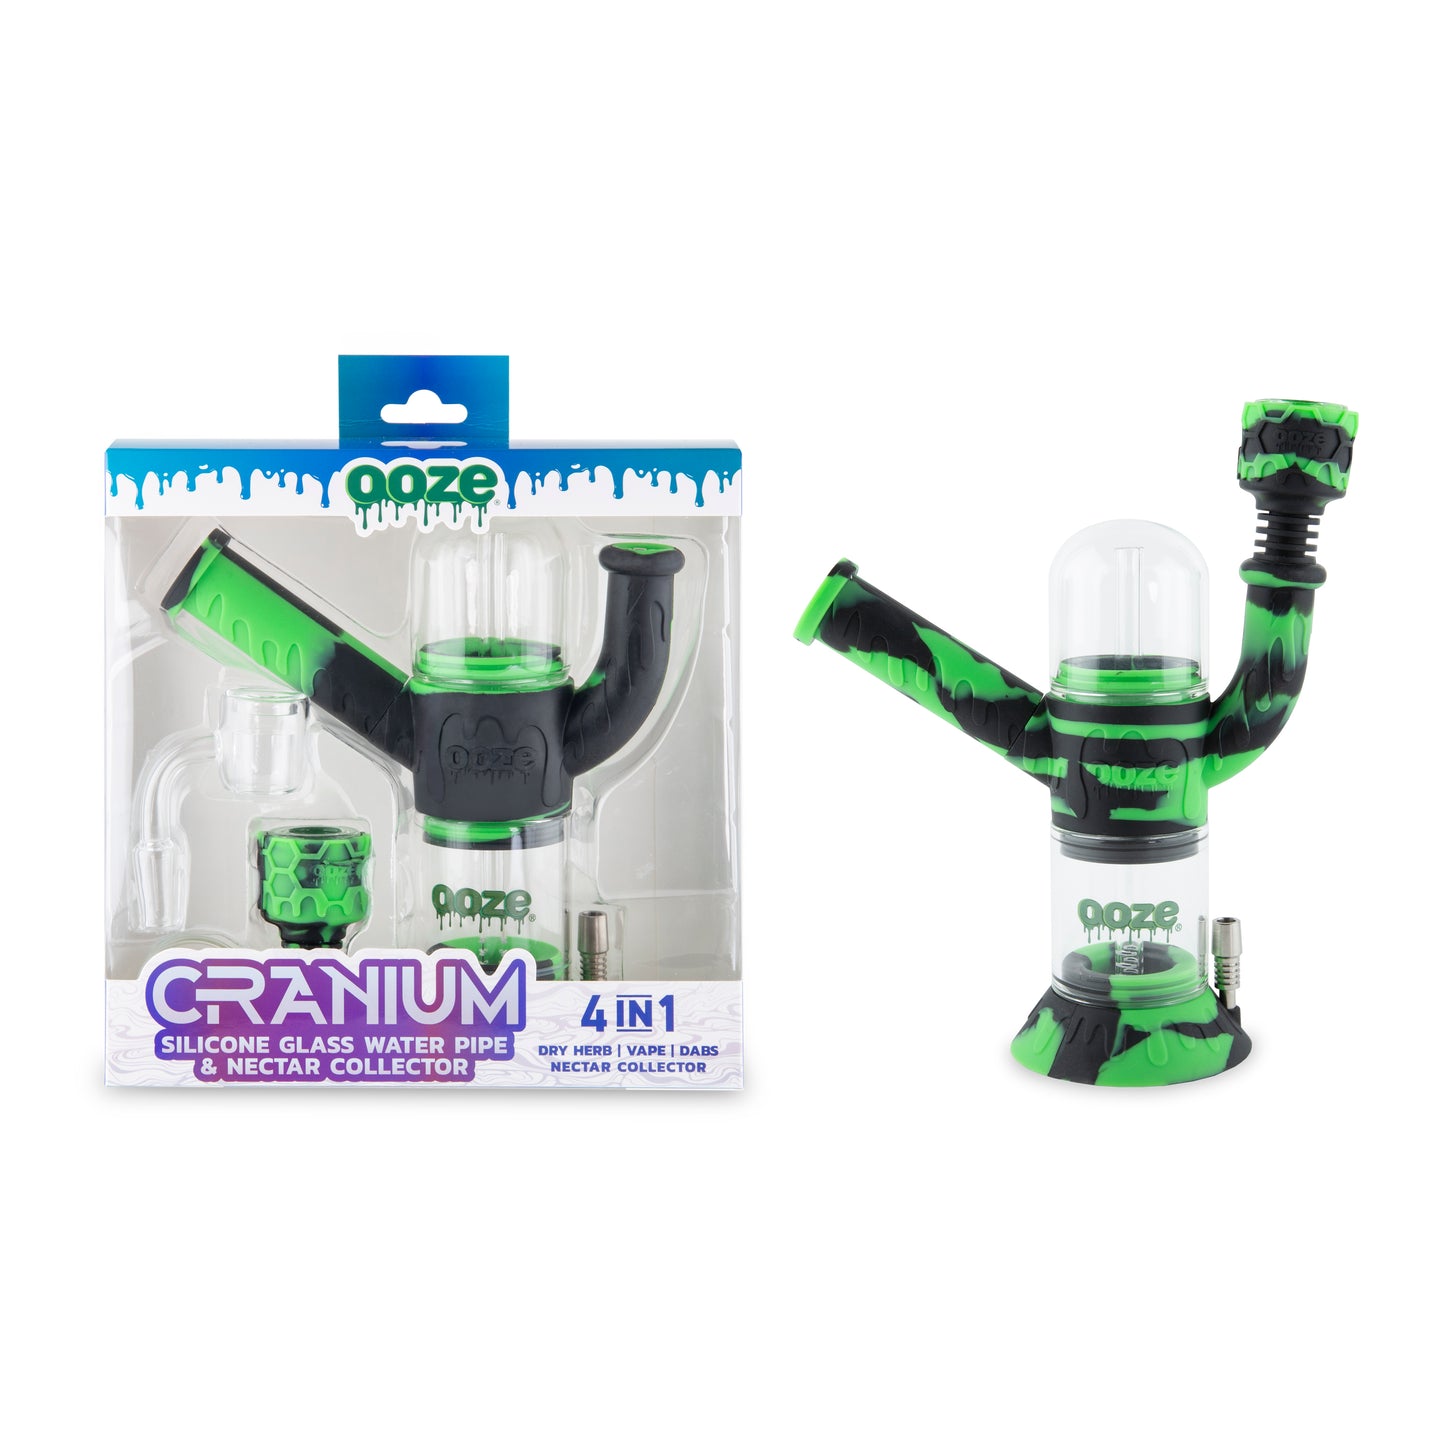 Ooze Cranium Silicone Water Pipe, Dab Rig & Dab Straw - Chameleon